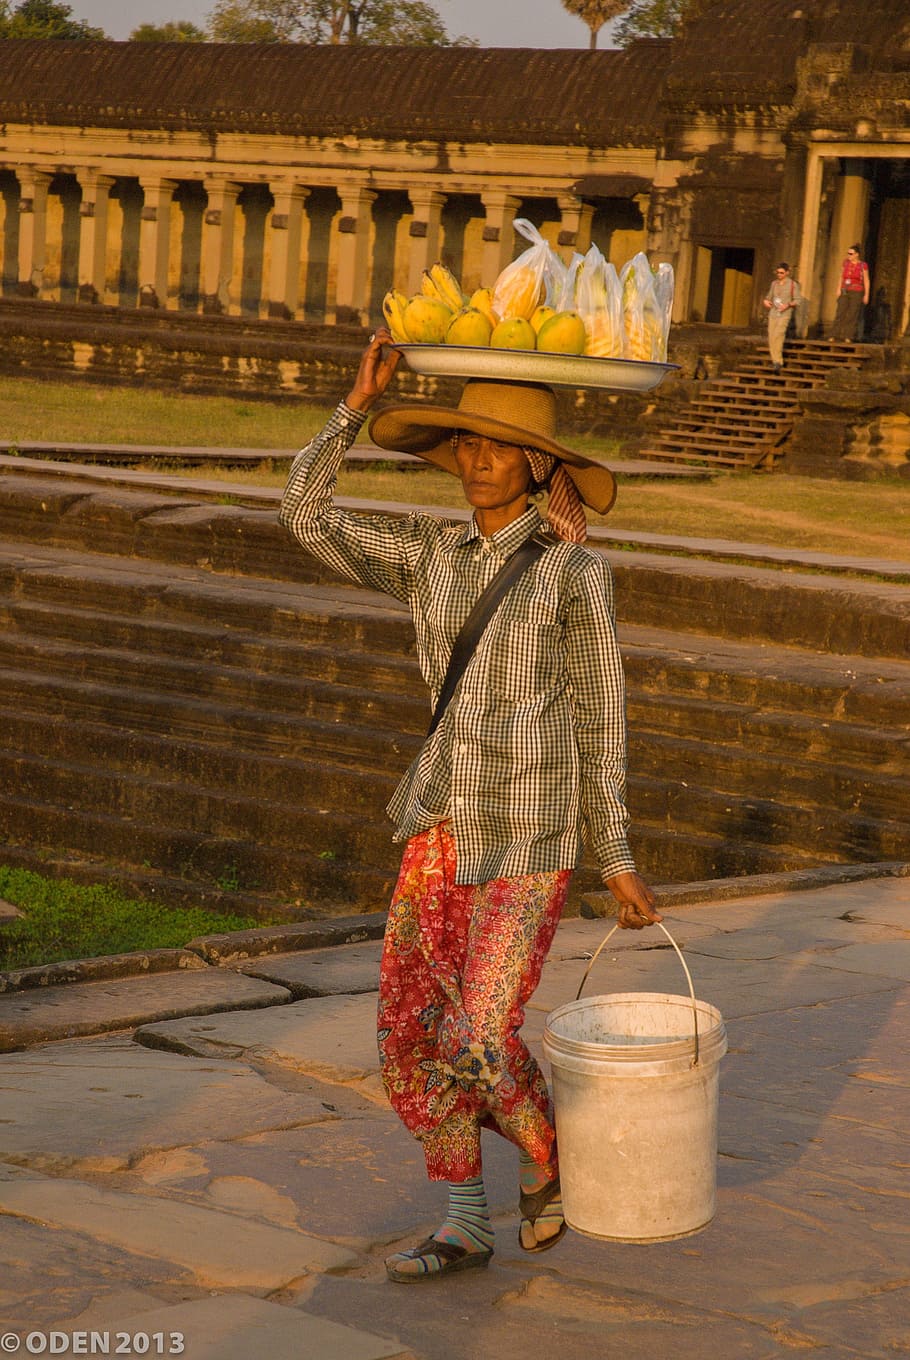 Temple, Angkor Wat, Cambodia, Siem Reap, woman, hard, difficult, poor, carrying, fruit